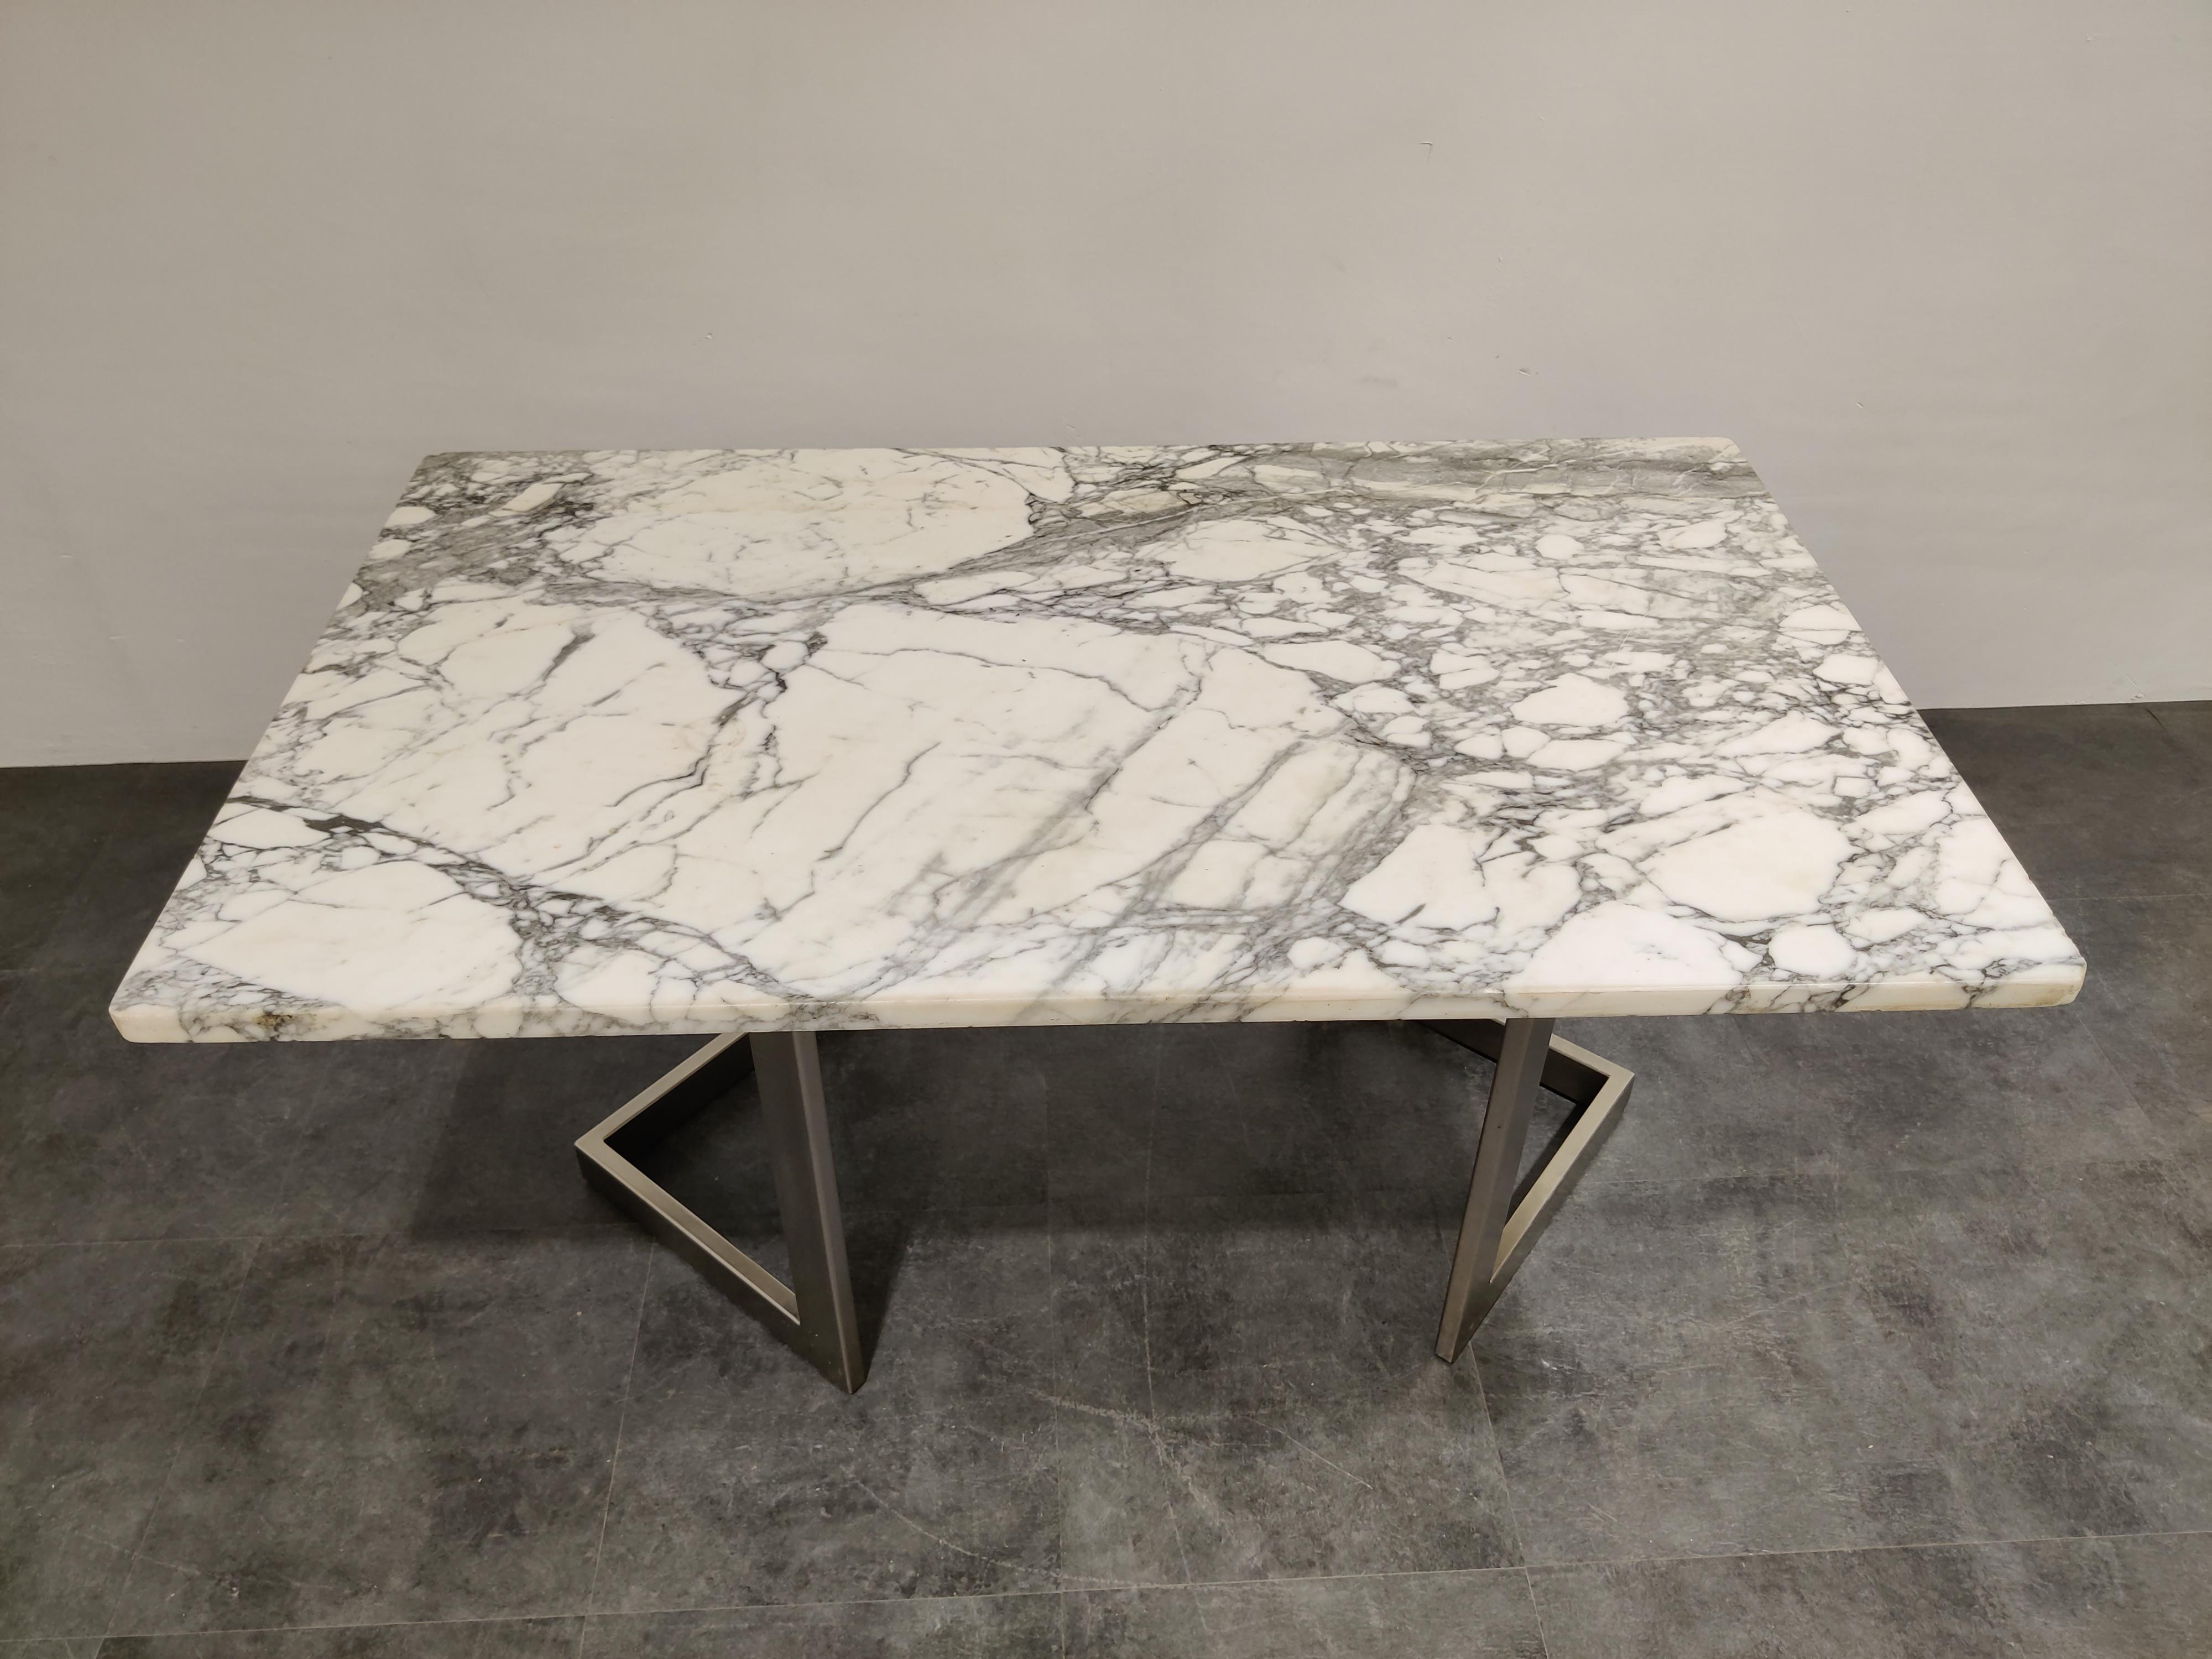 Beautiful modernist dining table designed by Francoise see (1952-...) in the 1970s.

Referred to as edition 'Ramsay'.

This rare and exceptional dining table consists of V-shaped inox legs supporting a thick Carrara marble top with beautiful